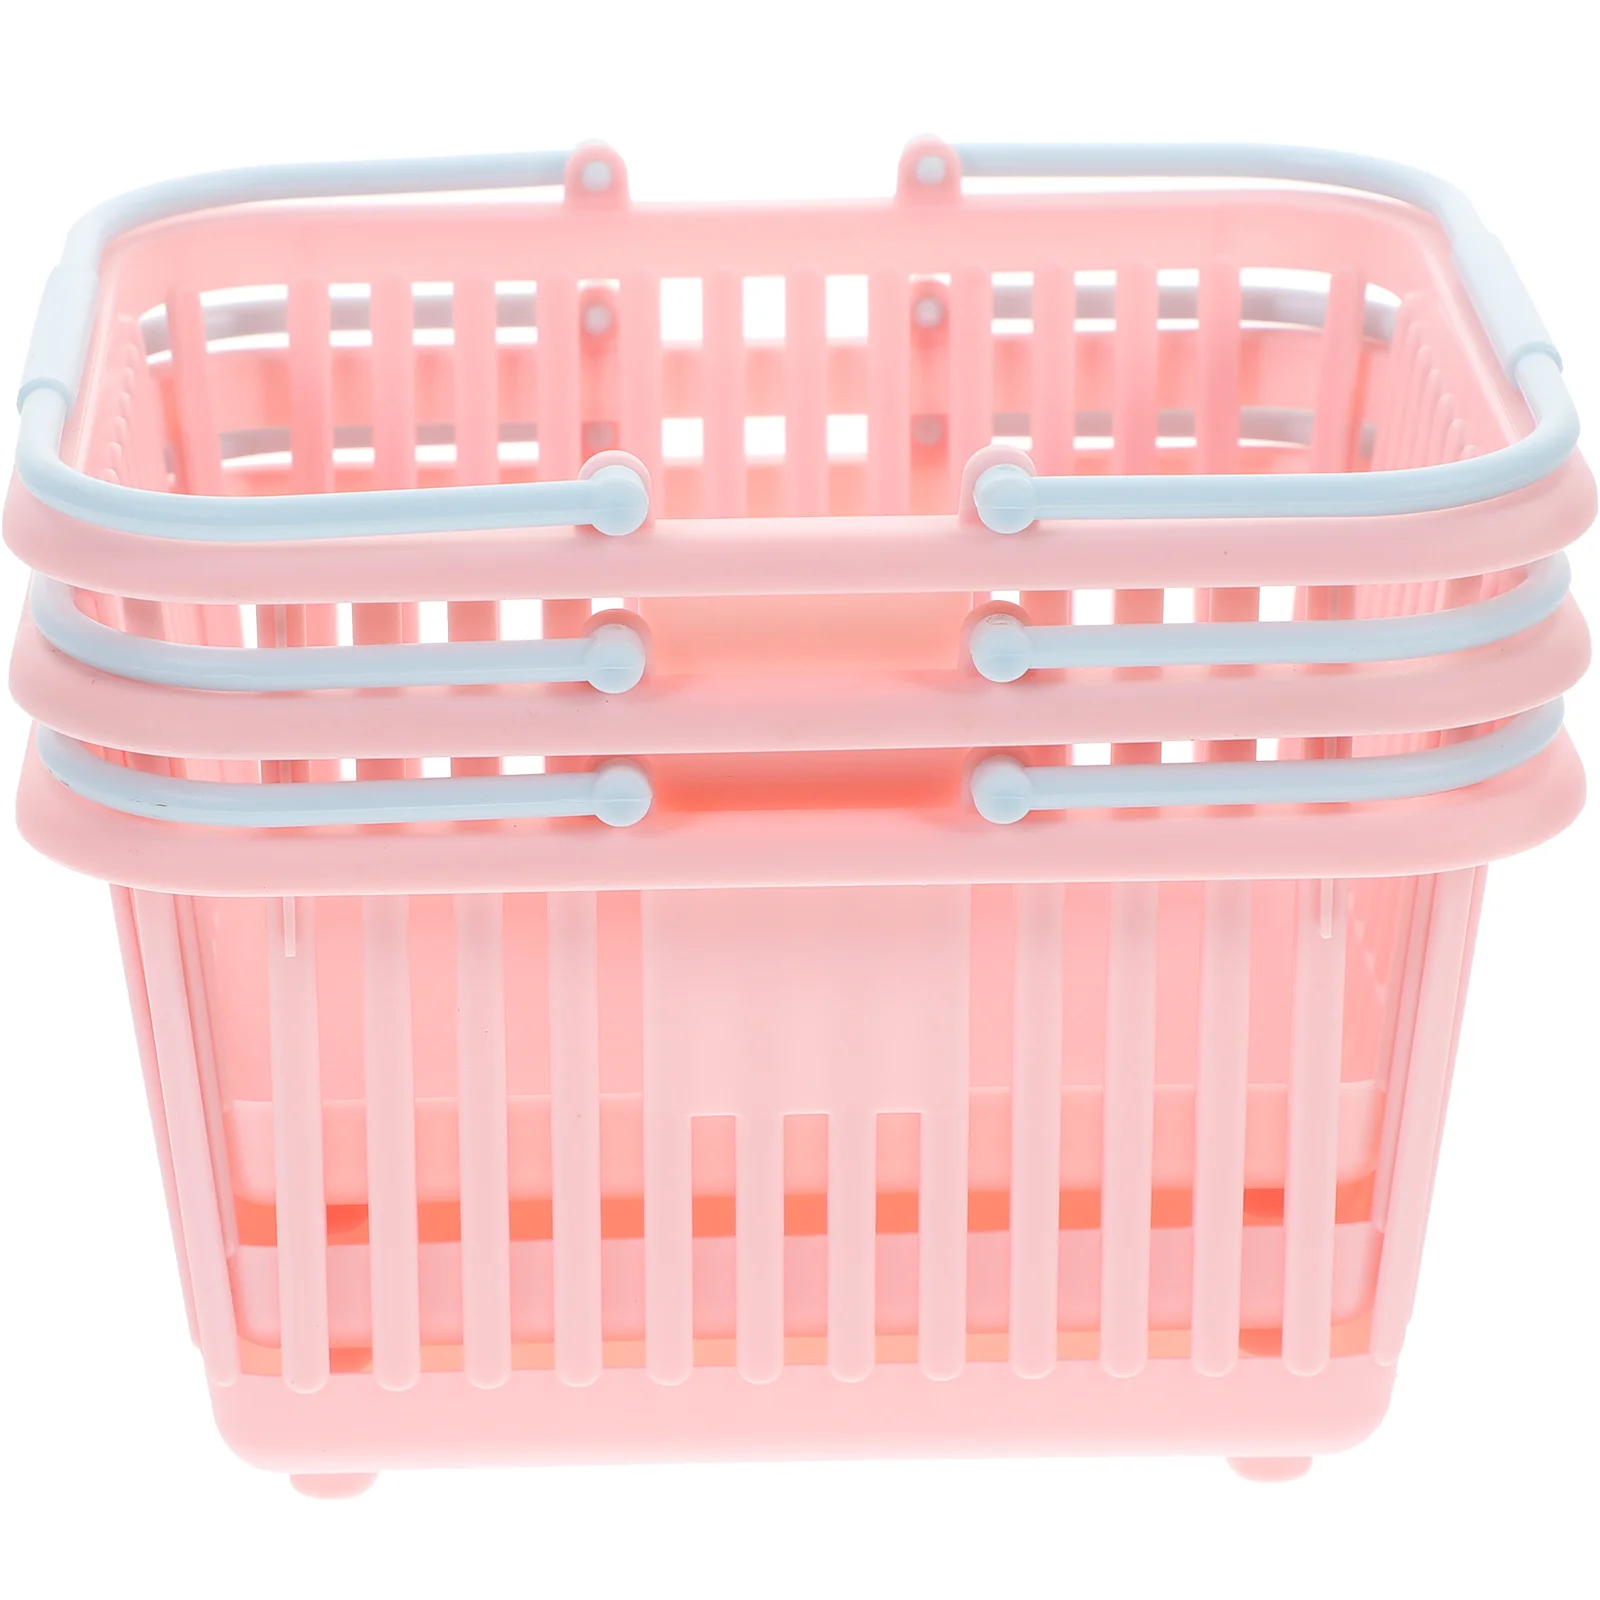 

Toddmomy Small Plastic Baskets Portable Shower Basket Grocery Baskets With Handles Plastic Beach Tote Small Basket